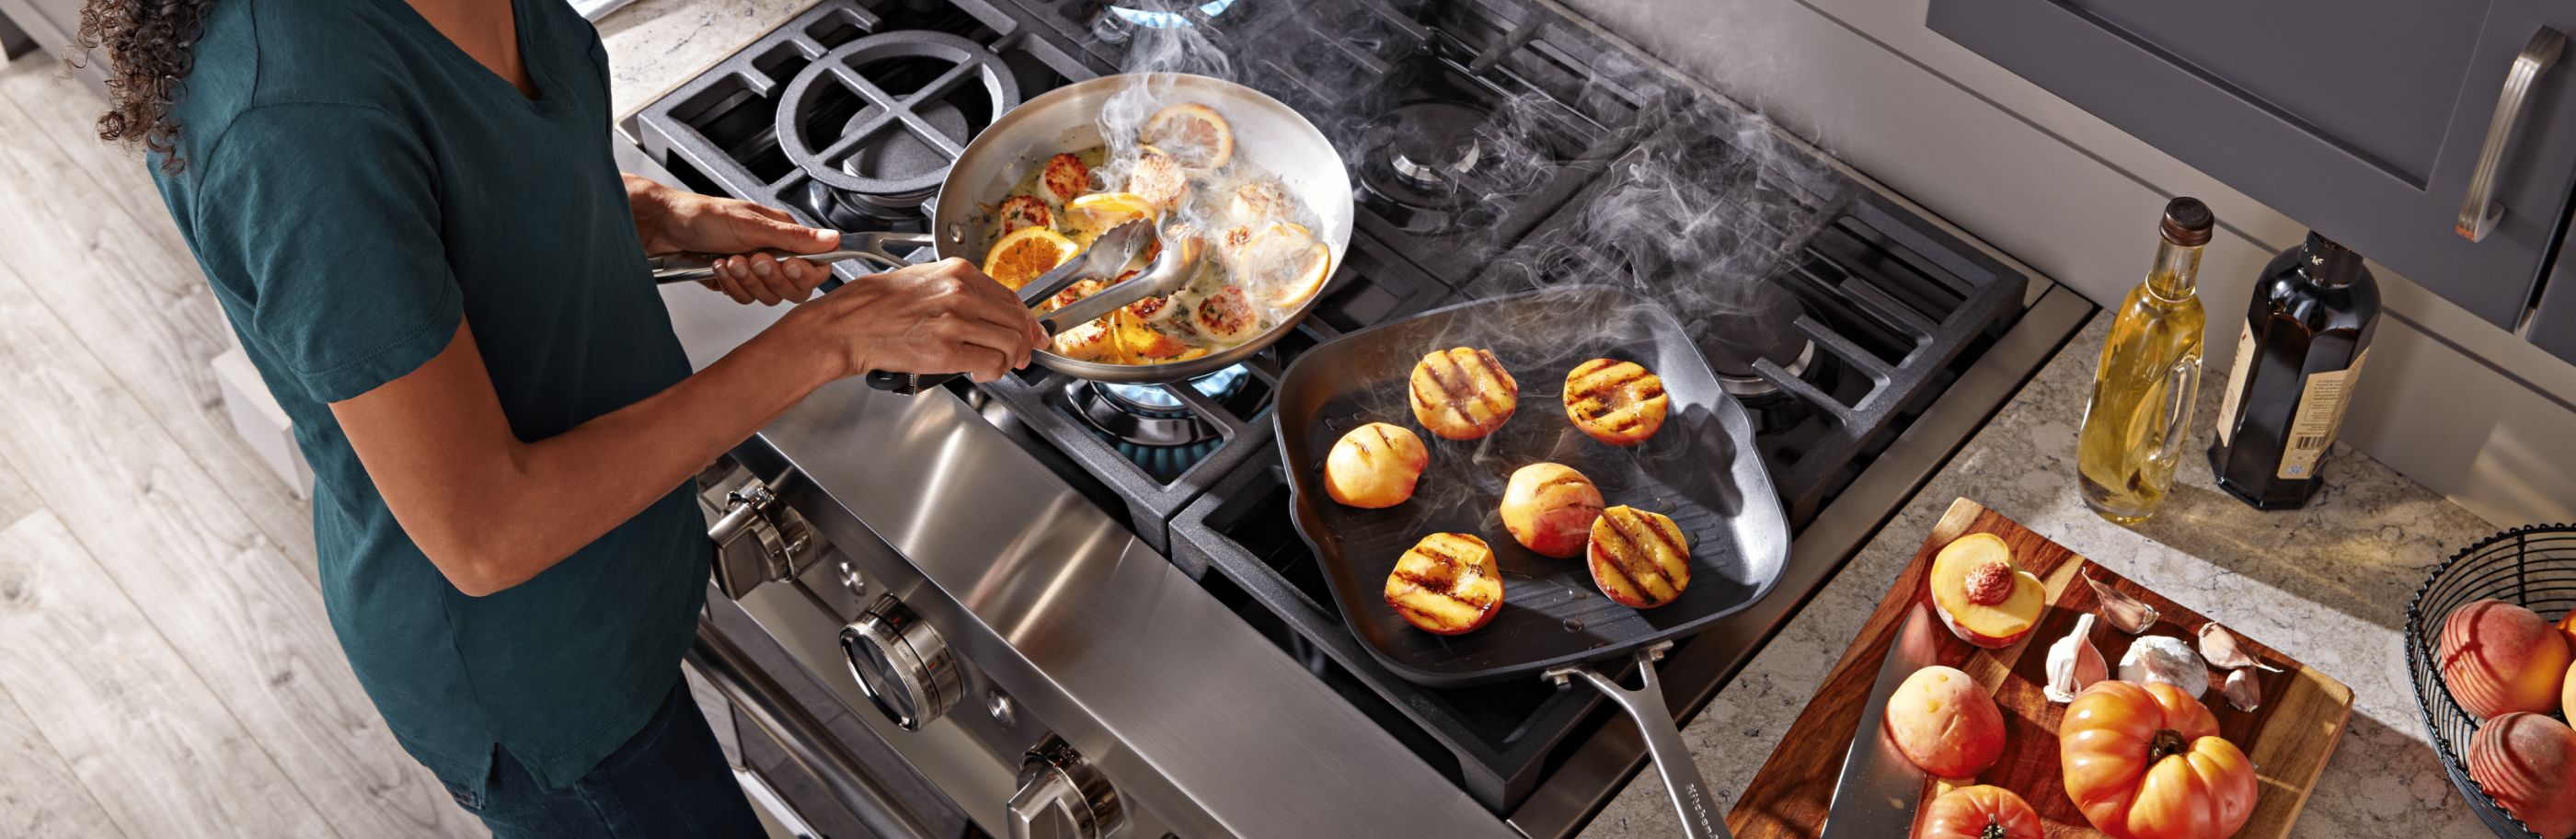 Female cooking scallops and citrus in a frying pan and grilling peaches in a grill pan on a gas range.